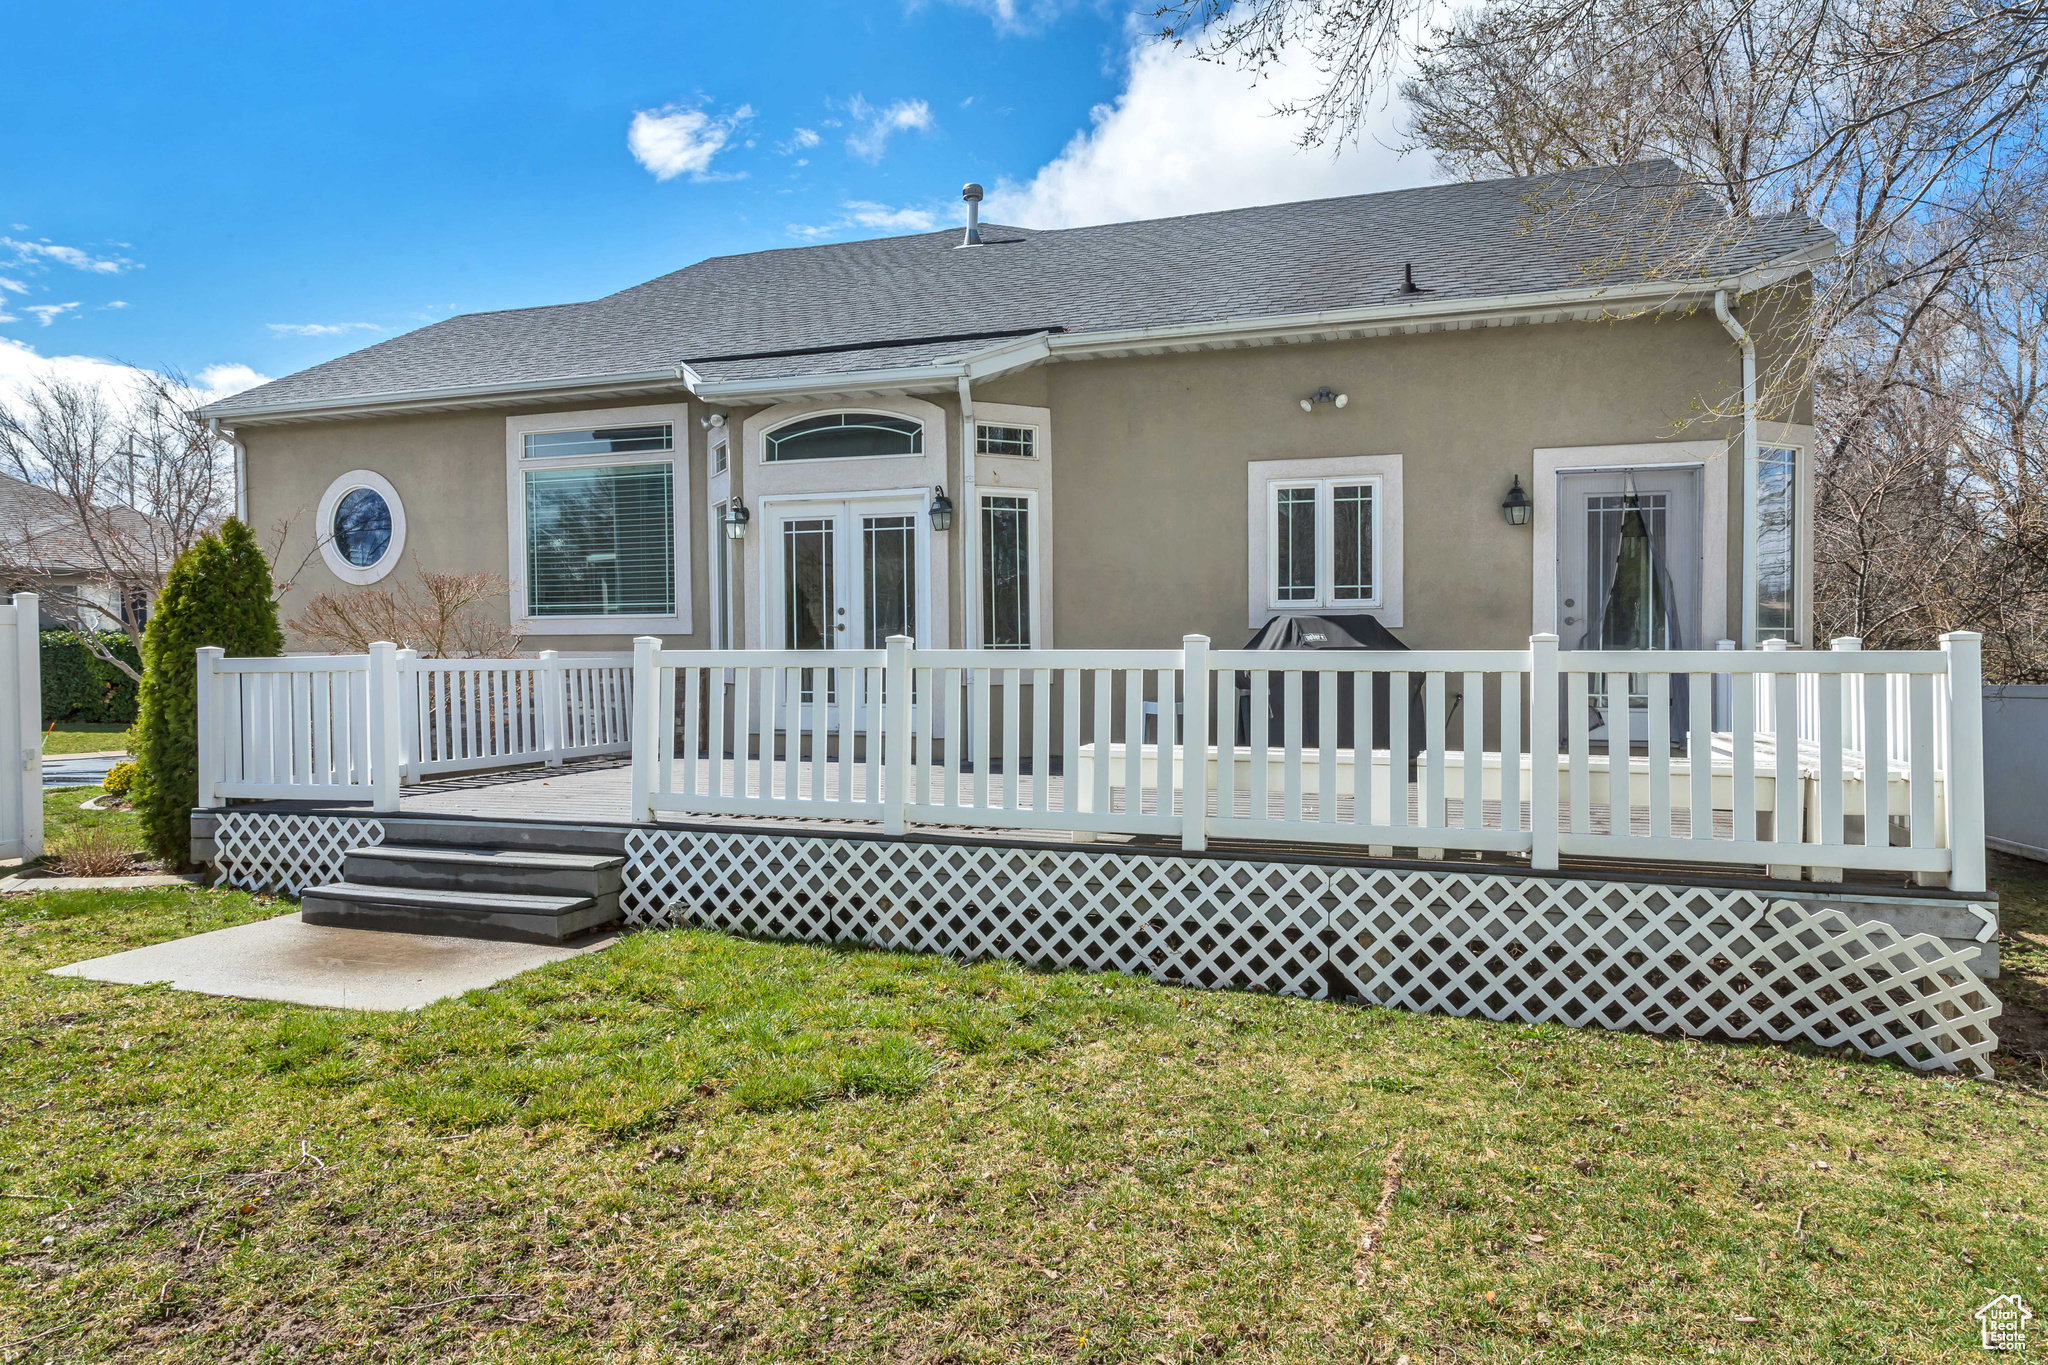 Large backyard on 1.5 lots sets this home apart from all the others in the community.  Oversized deck perfect for entertaining or relaxing. Gas line ran to deck for new Weber grill, which is included with the home.